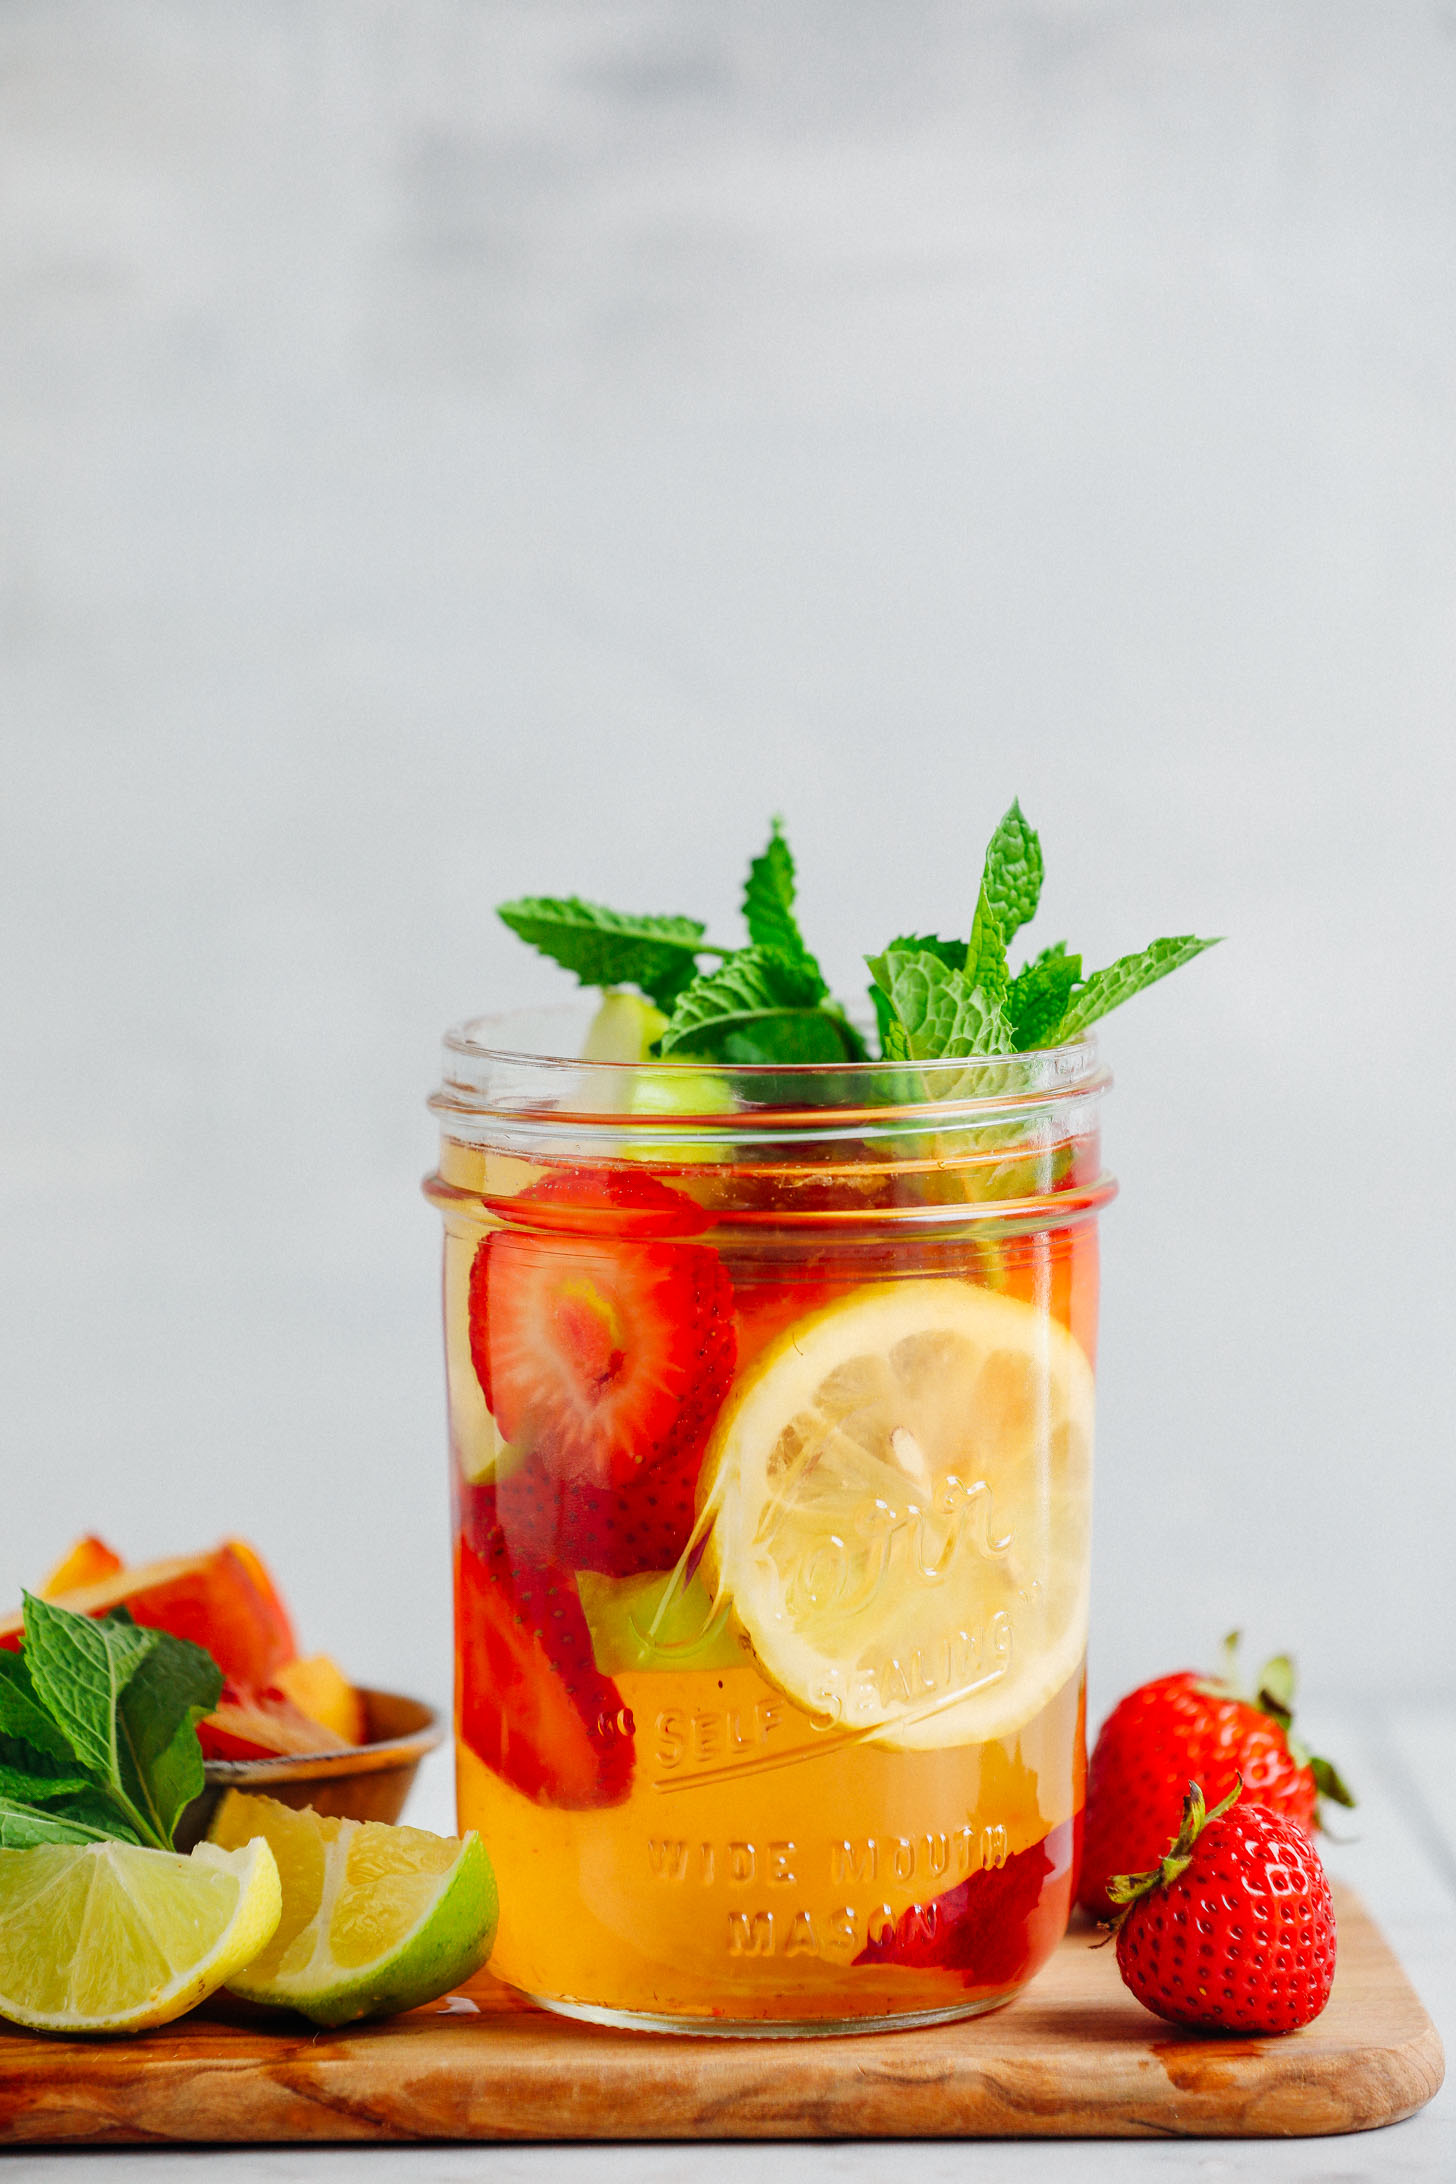 REFRESHING Easy Traditional White Sangria! 8 Ingredients, 1 pitcher, SO delicious! #cocktail #recipe #plantbased #sangria #wine #summer #fruit #minimalistbaker